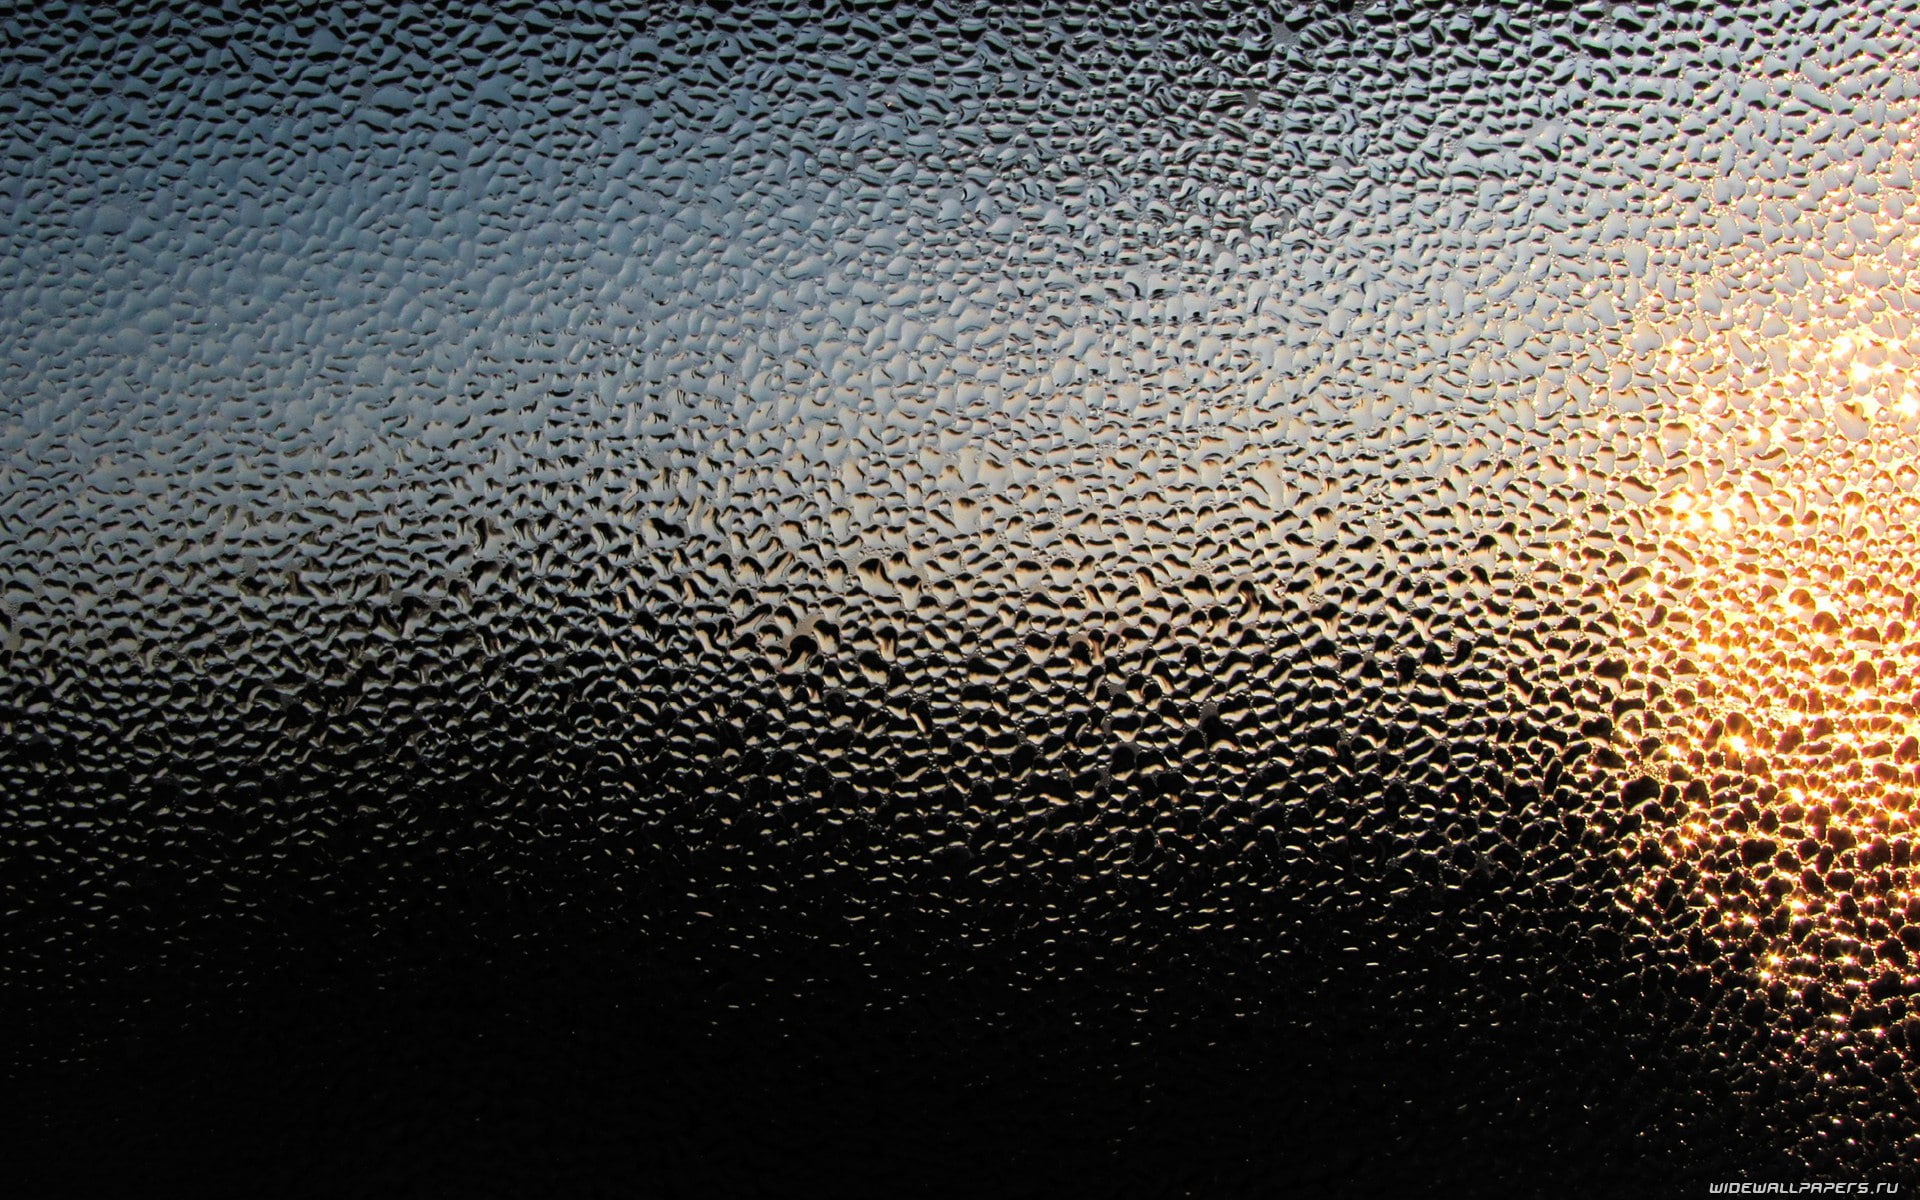 water on glass, backgrounds, full frame, wet, pattern, textured